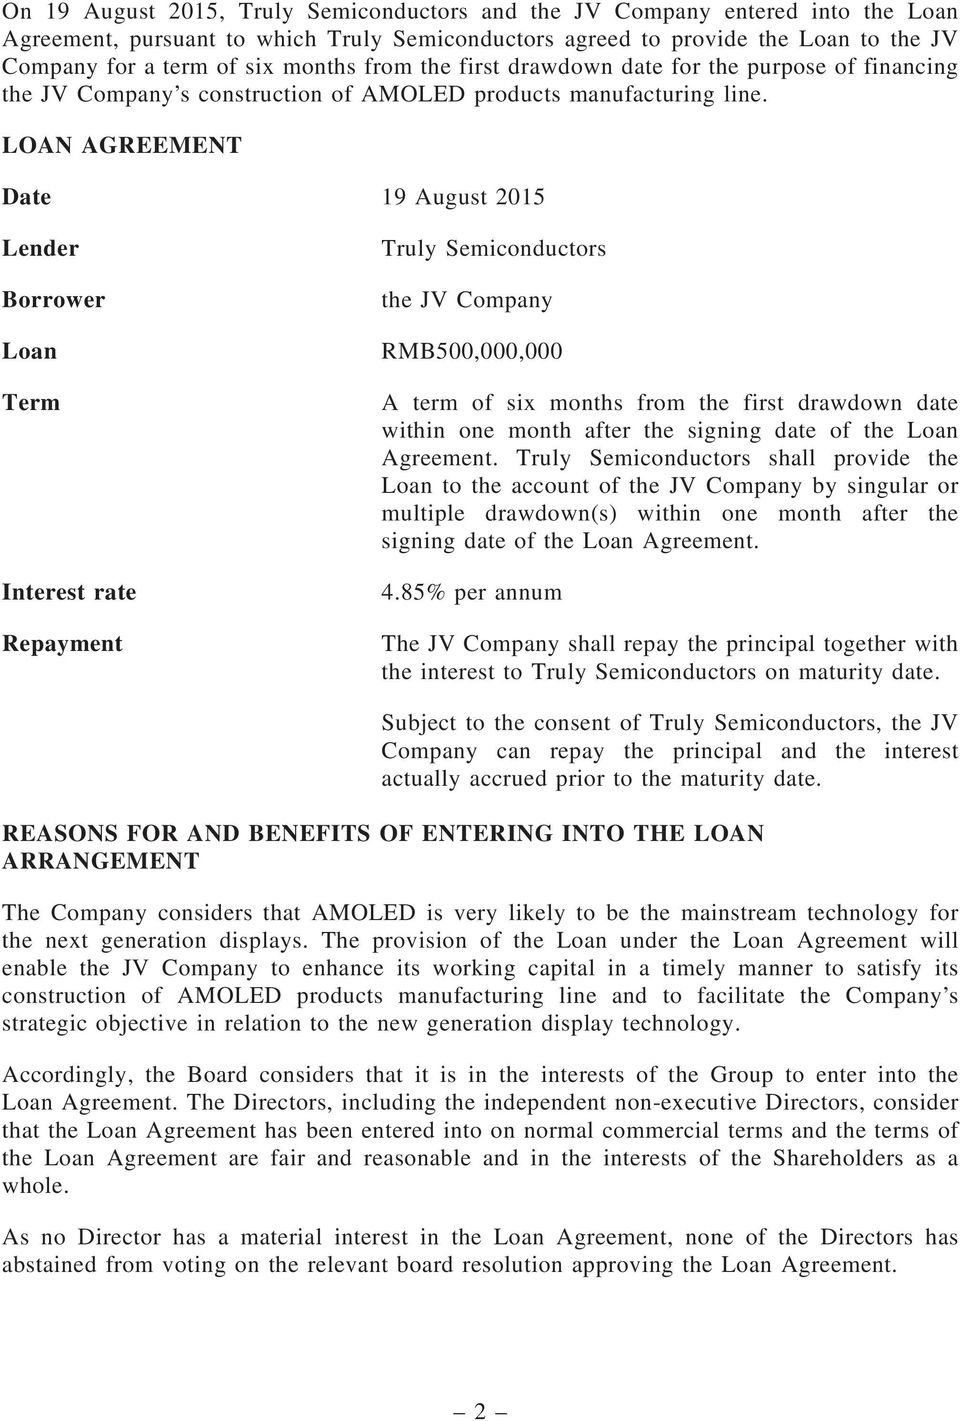 Date 19 August 2015 Lender Borrower Loan Term Interest rate Repayment Truly Semiconductors the JV Company RMB500,000,000 A term of six months from the first drawdown date within one month after the